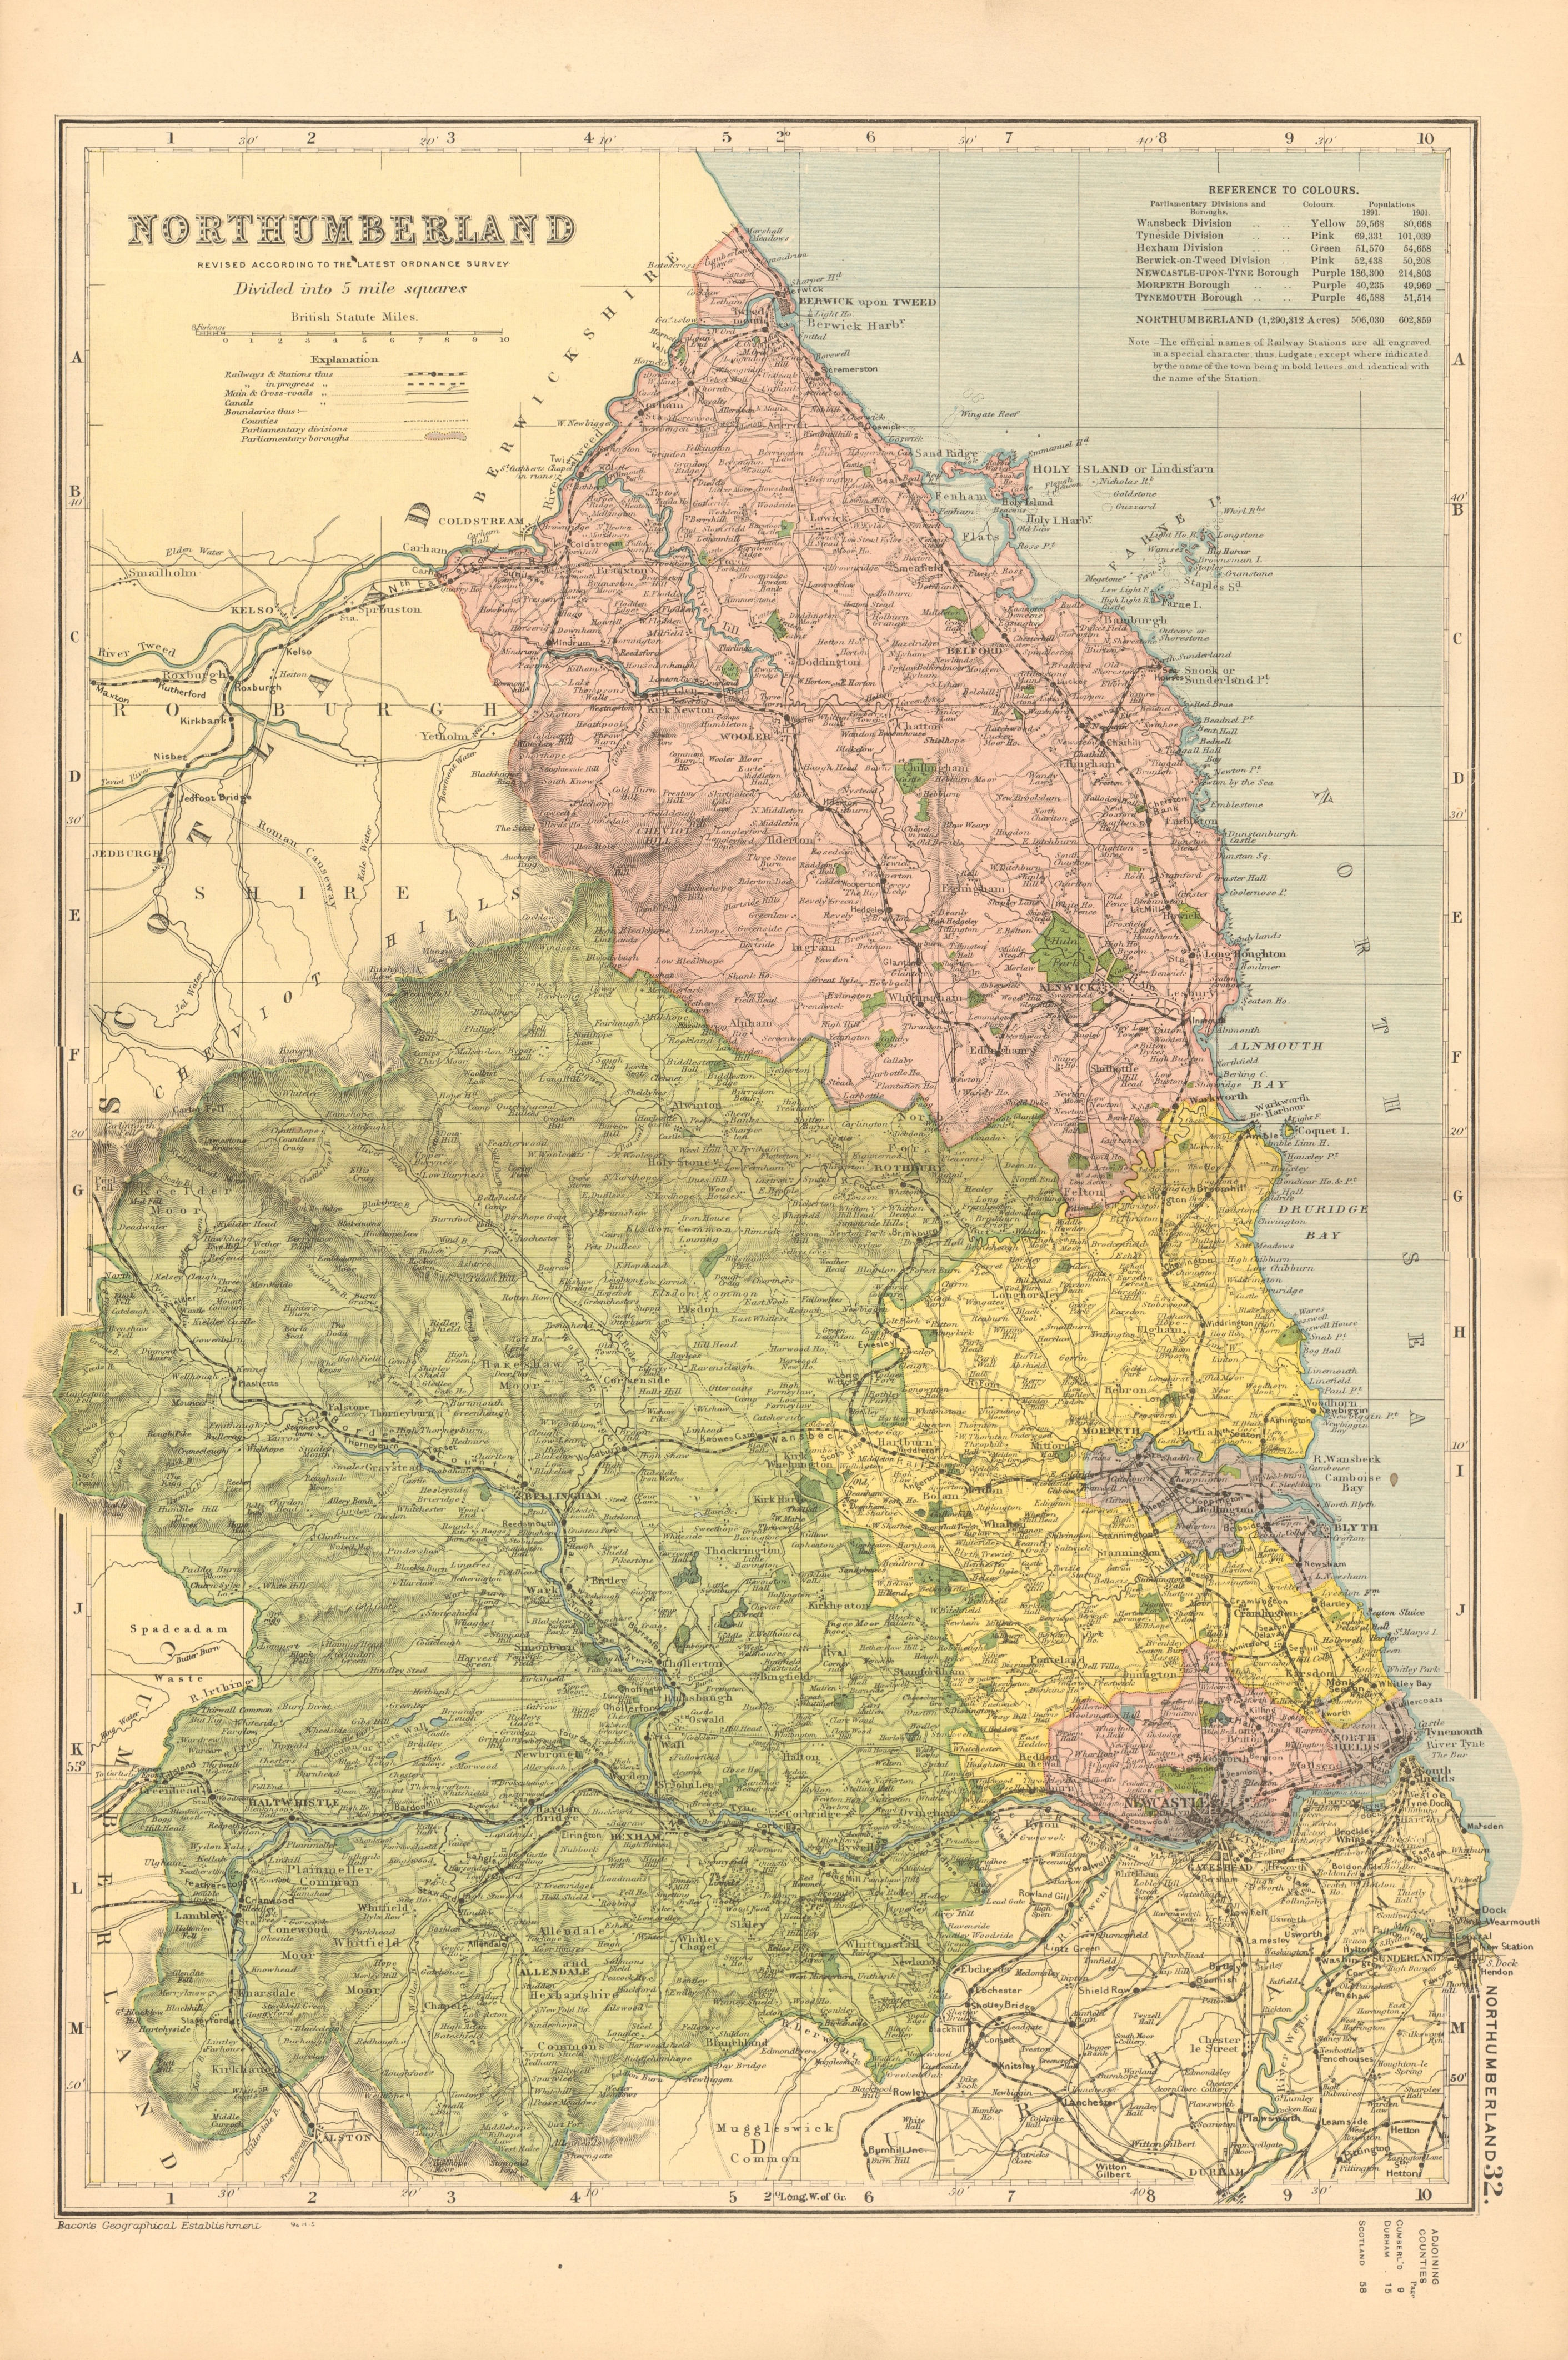 Associate Product NORTHUMBERLAND. Showing Parliamentary divisions,boroughs & parks.BACON 1904 map